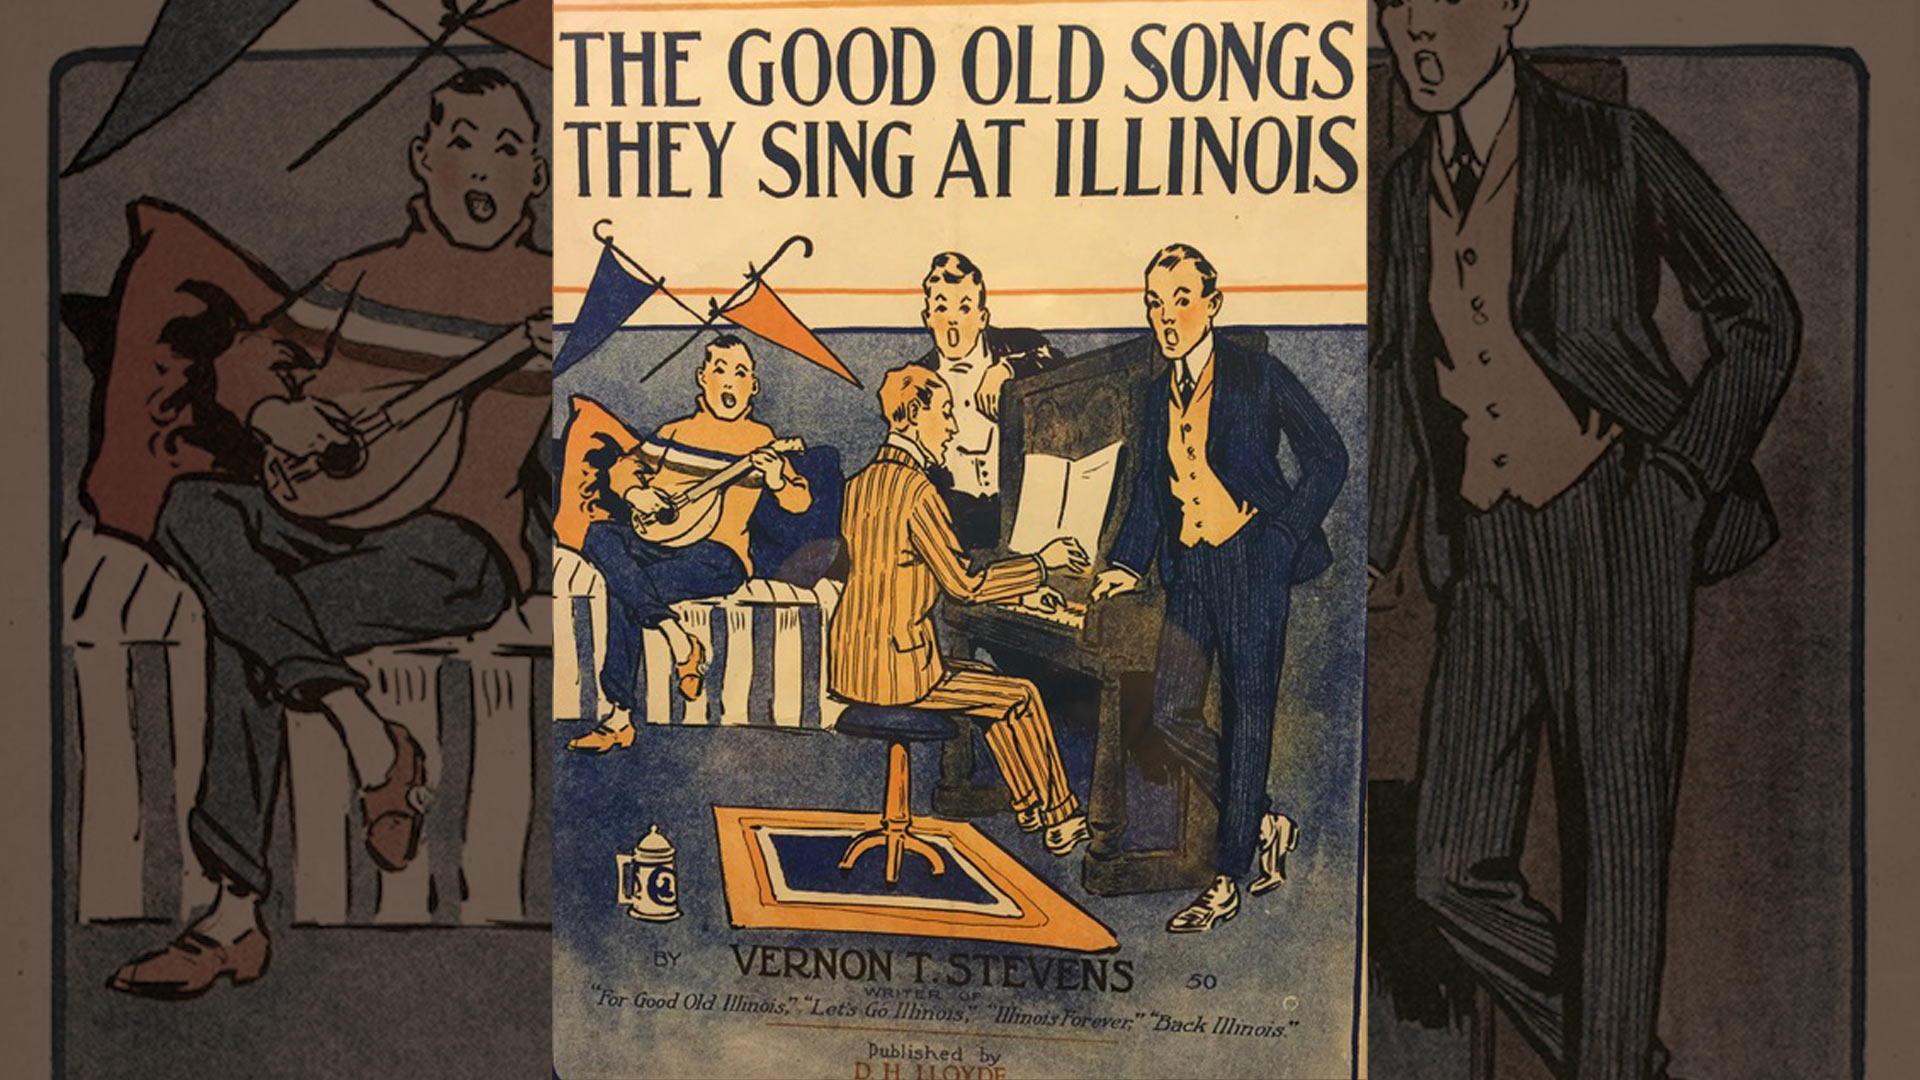 The Good Old Songs They Sing at Illinois, sheet music cover from Joe Rank